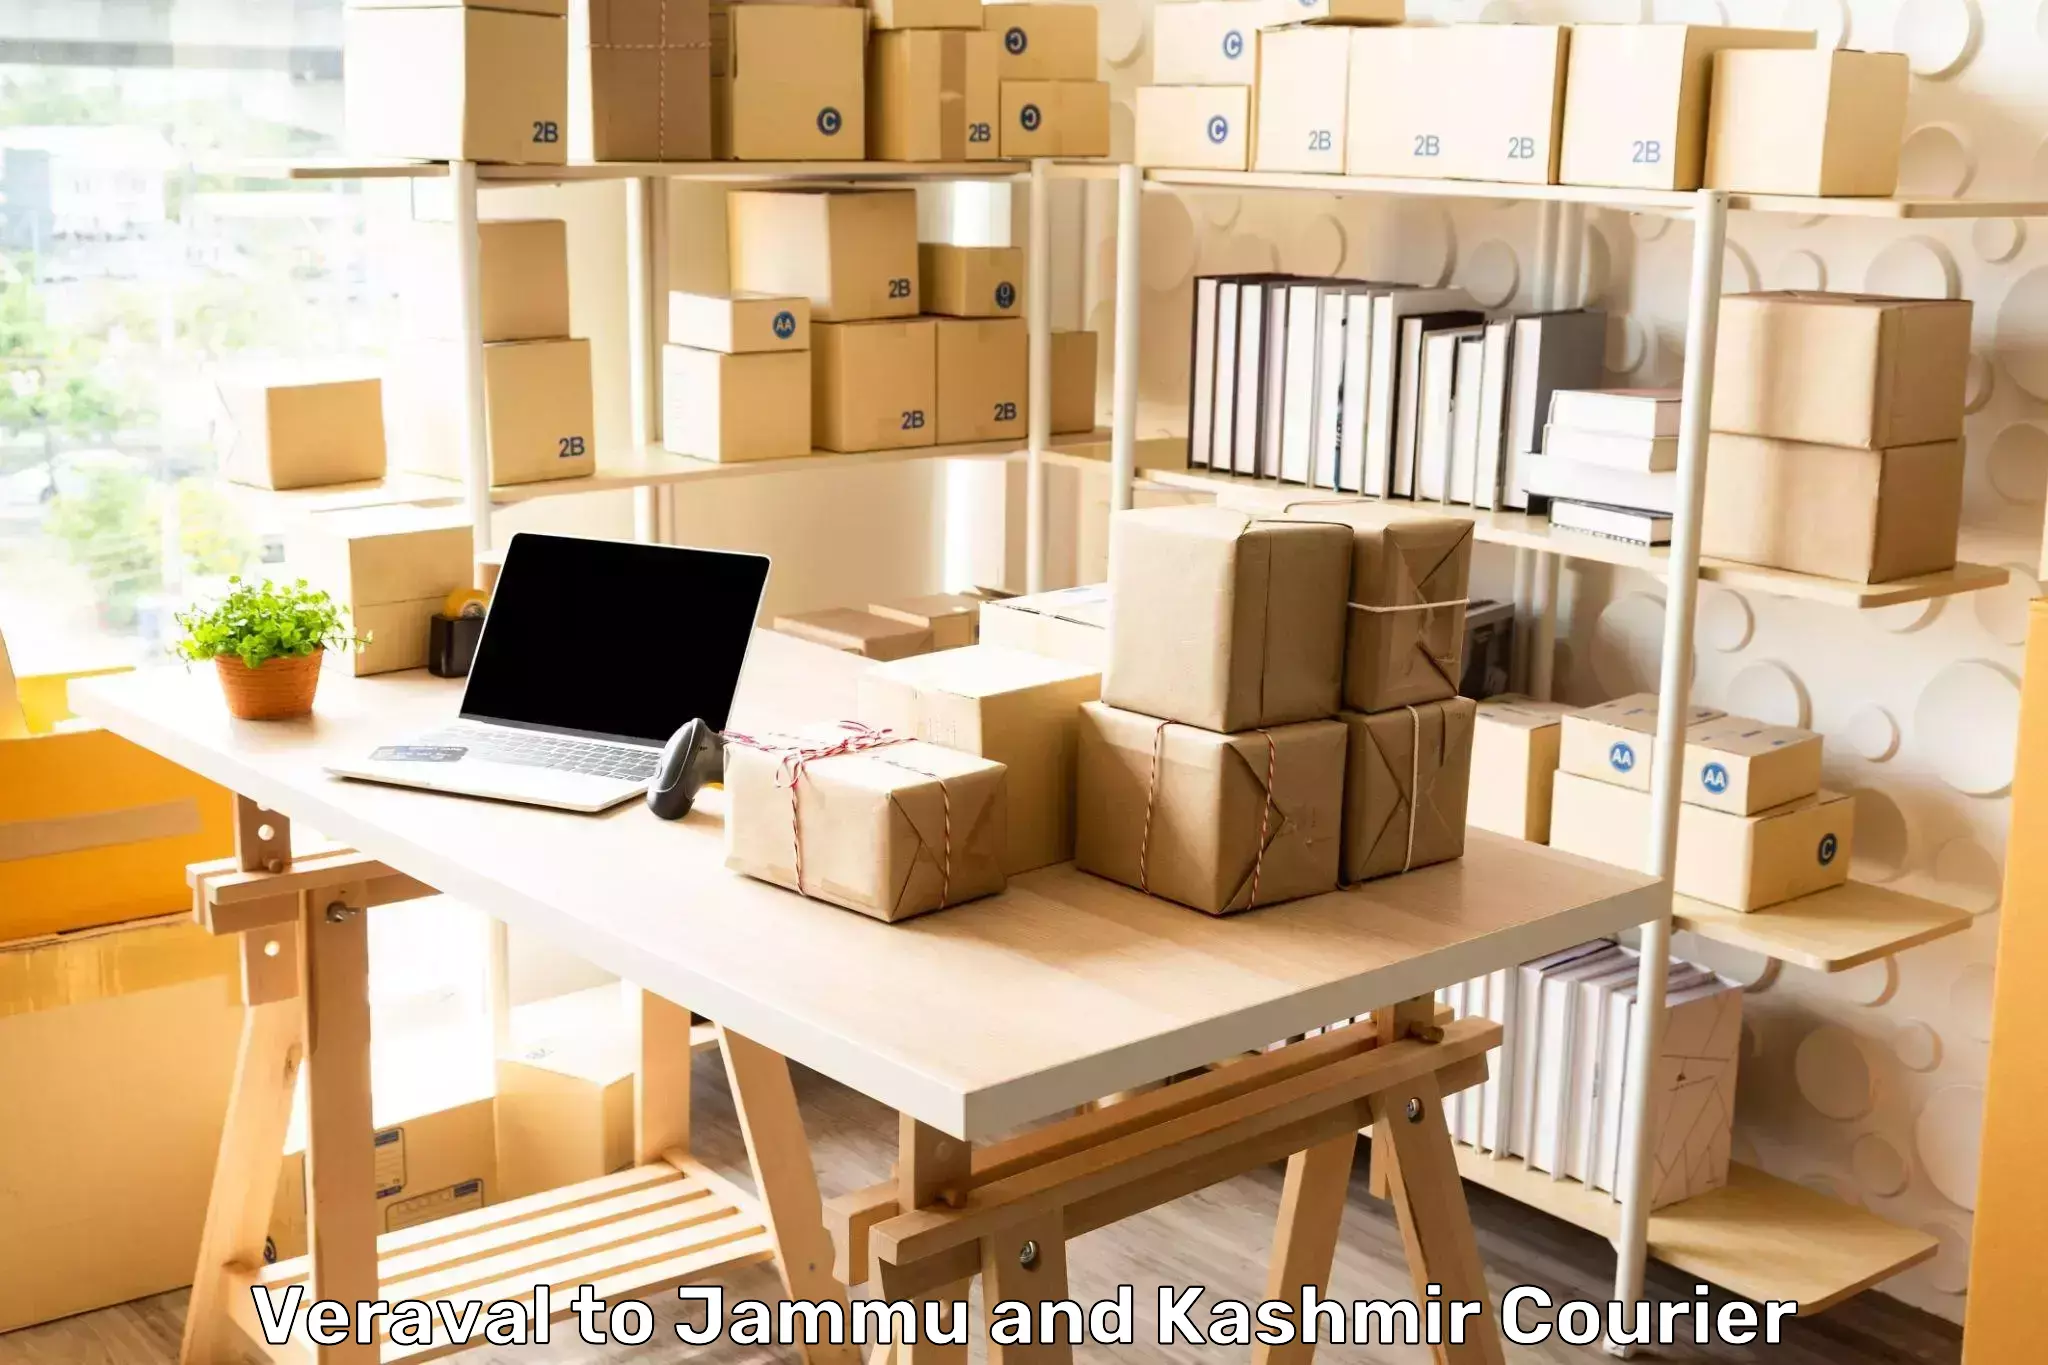 Package tracking Veraval to Jammu and Kashmir